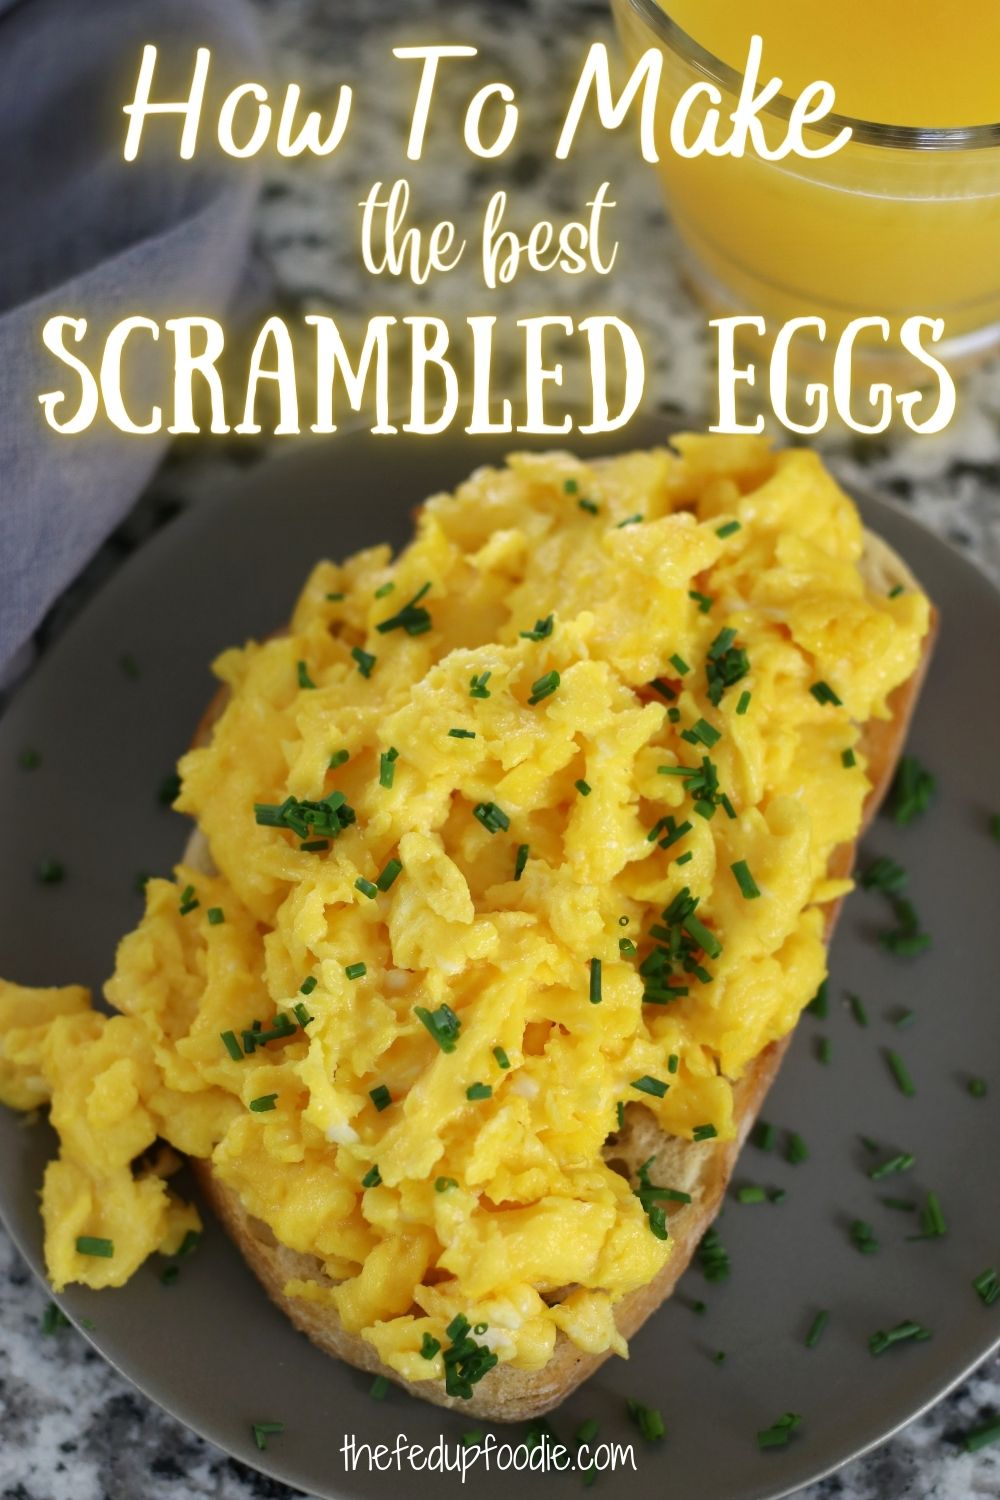 Soft and fluffy Scrambled Eggs made with or without milk is incredibly easy to make with these tips and tricks. Use these eggs in breakfast tacos, burritos, on avocado toast or just eaten on their own. Regardless, this recipe makes the best Scrambled Eggs. #ScrambledEggs #ScrambledEggsFluffy #BestScrambledEggs #BestScrambledEggsRecipeFluffy #HowToMakeTheBestScrambledEggsRecipe #FluffyScrambledEggs #FluffyScrambledEggsWithoutMilk